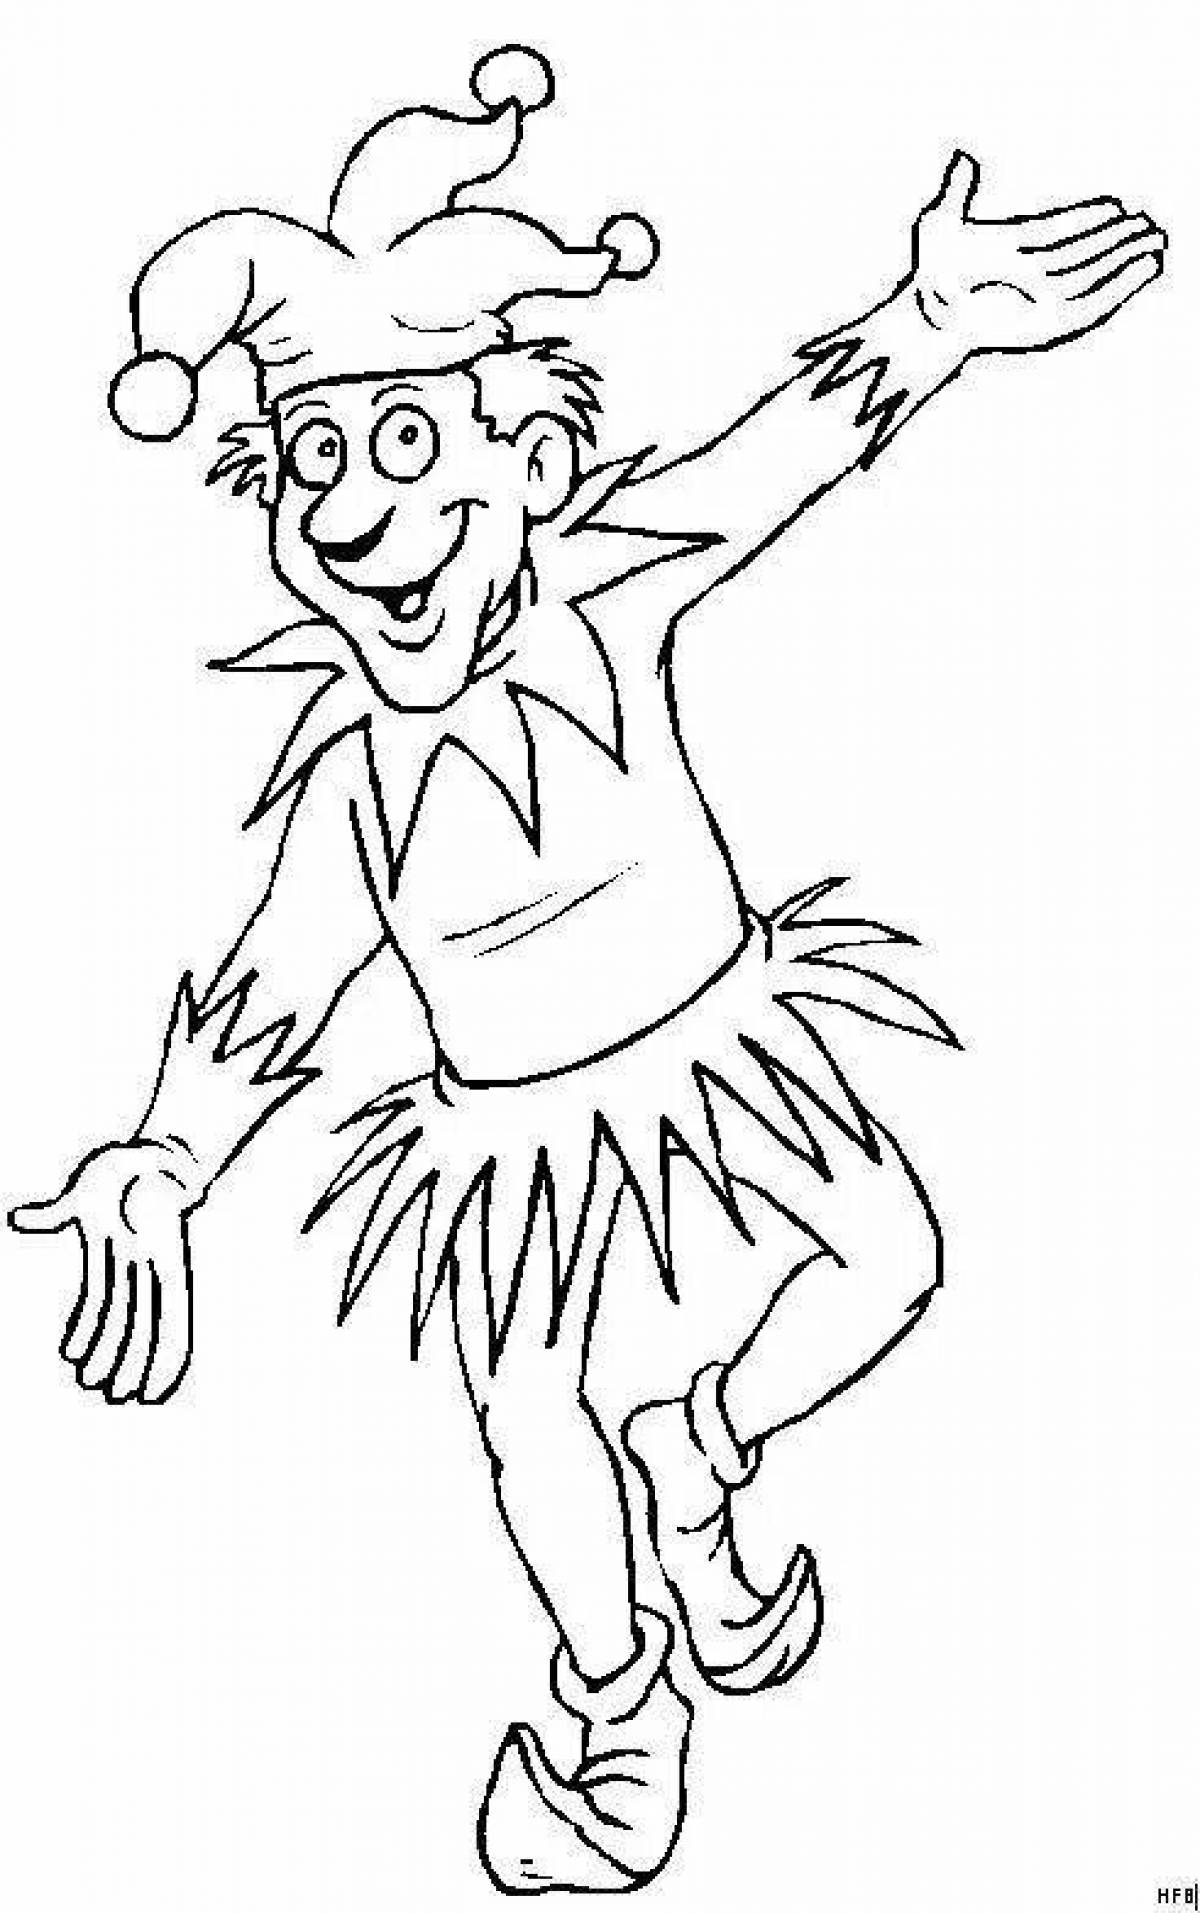 Colorful jester coloring page